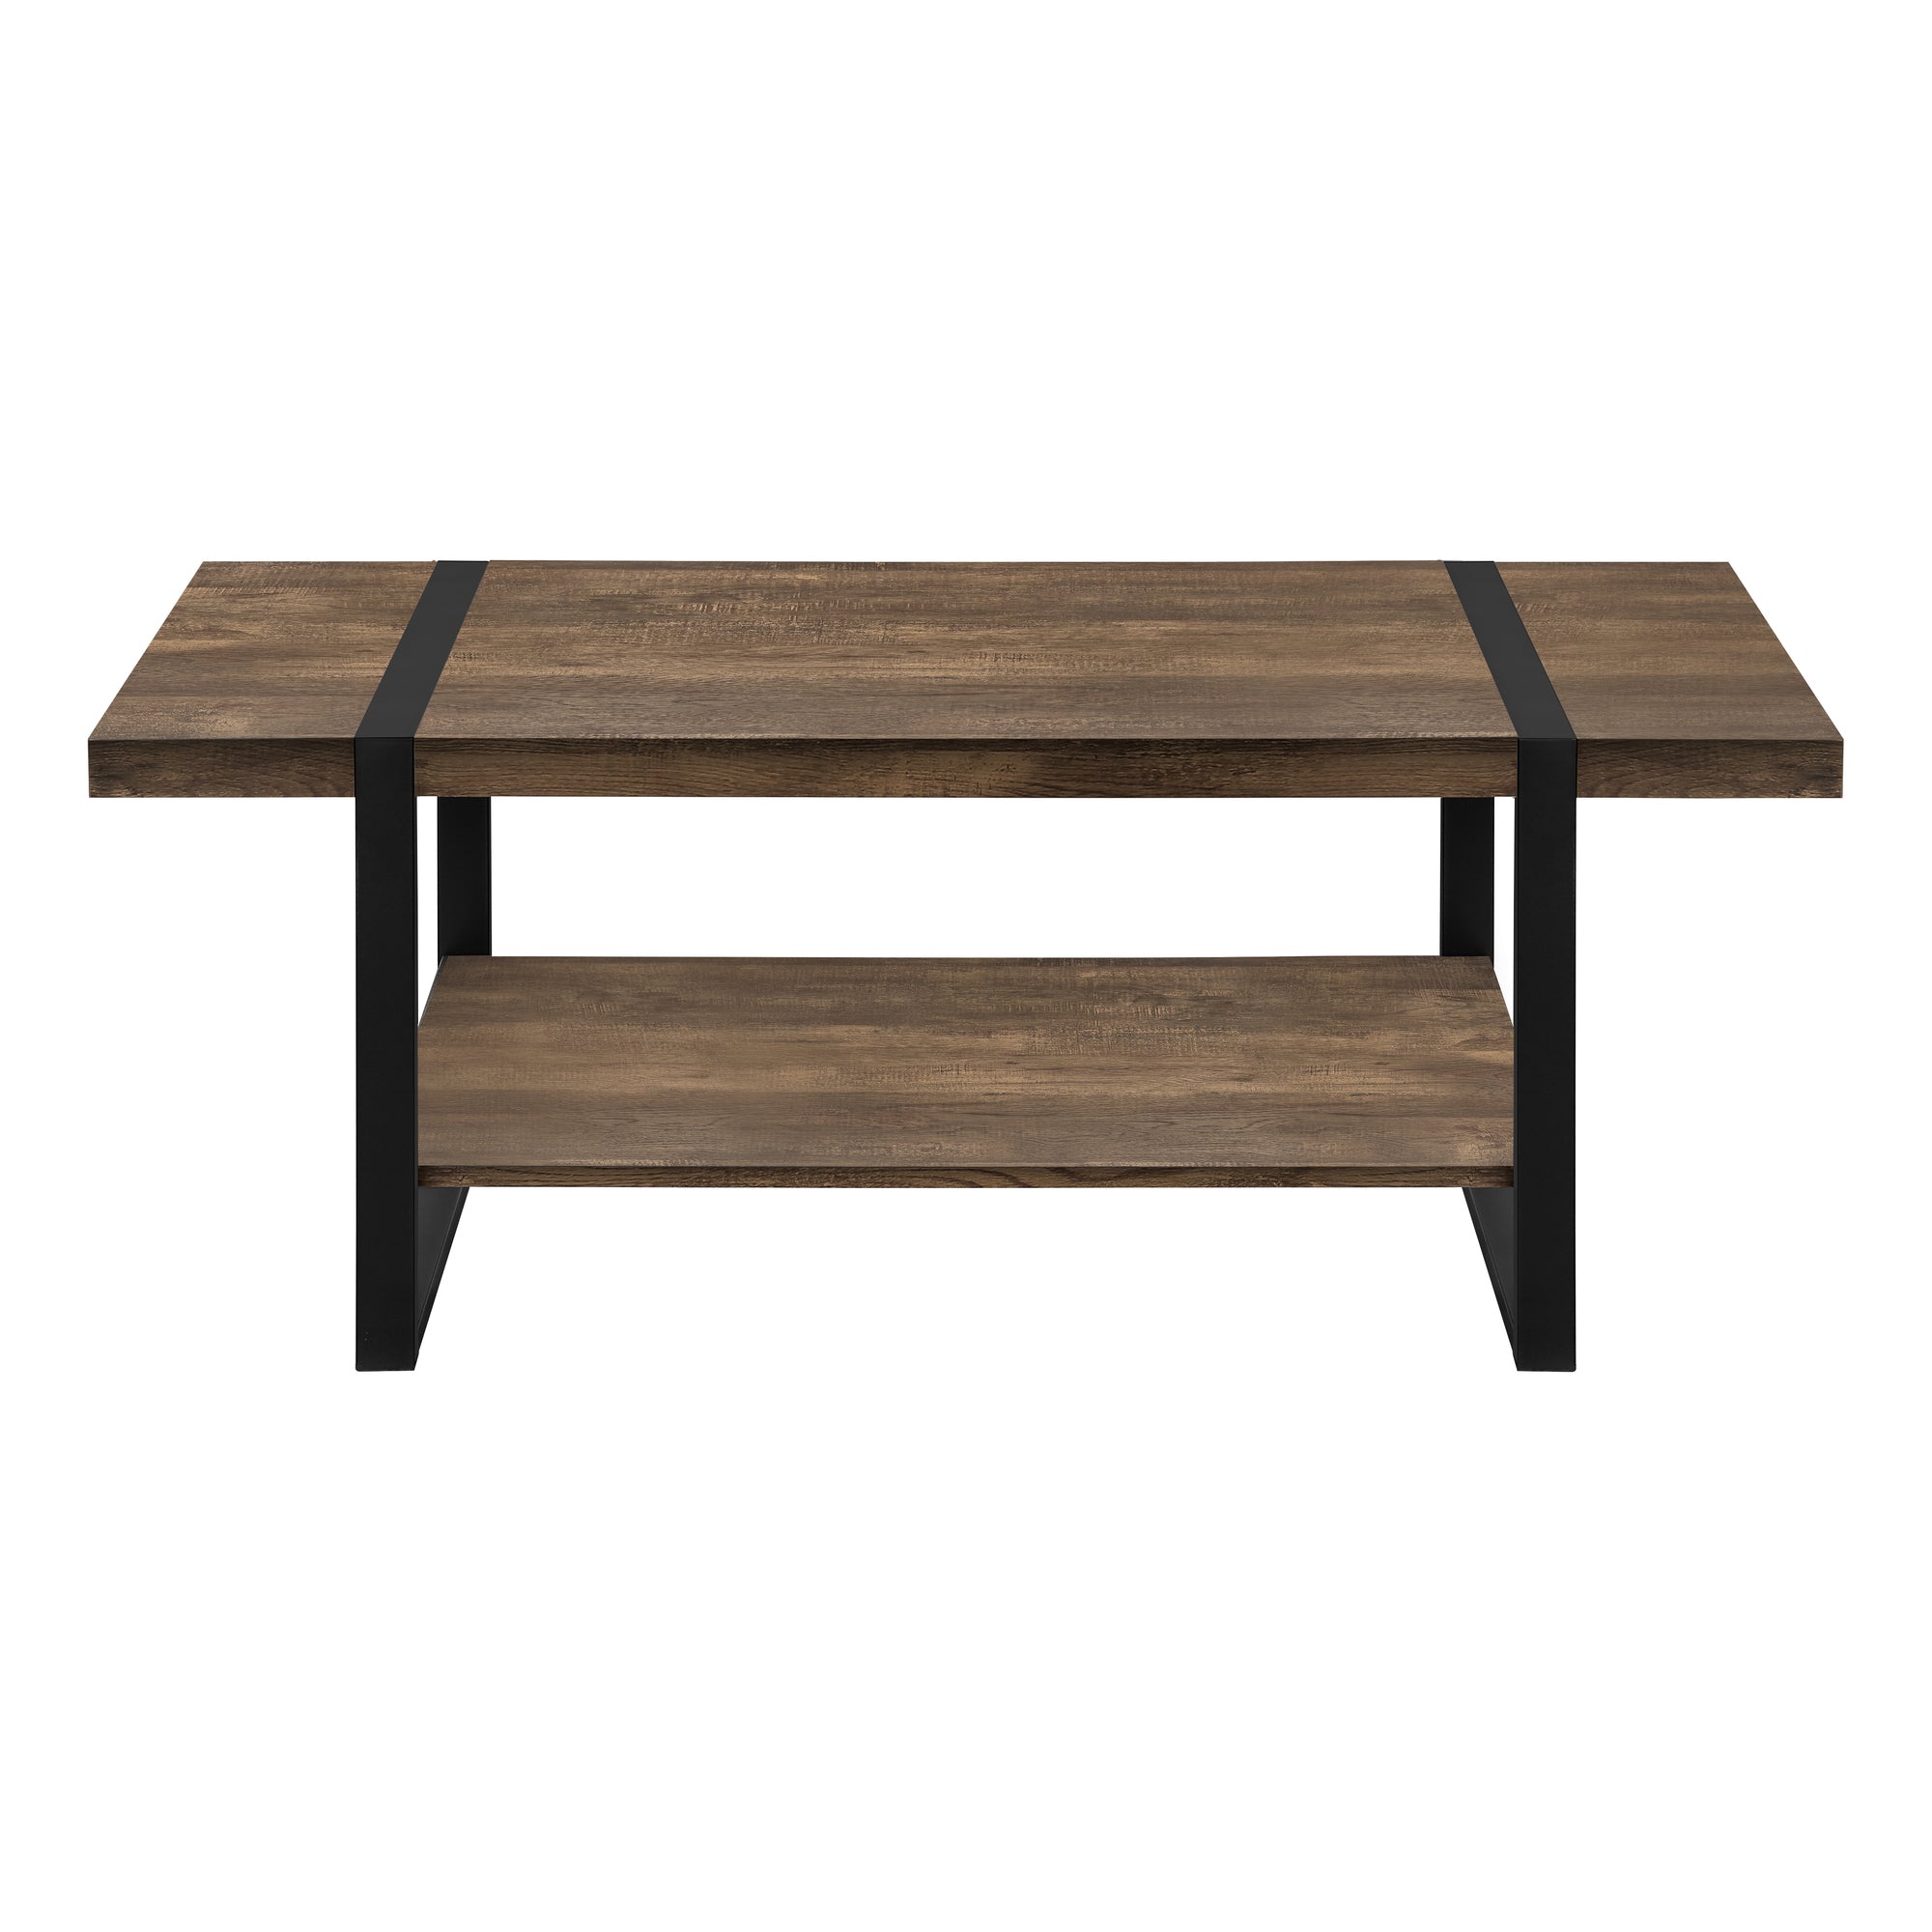 MN-552850    Coffee Table, Accent, Cocktail, Rectangular, Living Room, Metal Frame, Laminate, Brown Reclaimed Wood Look, Black, Contemporary, Industrial, Modern